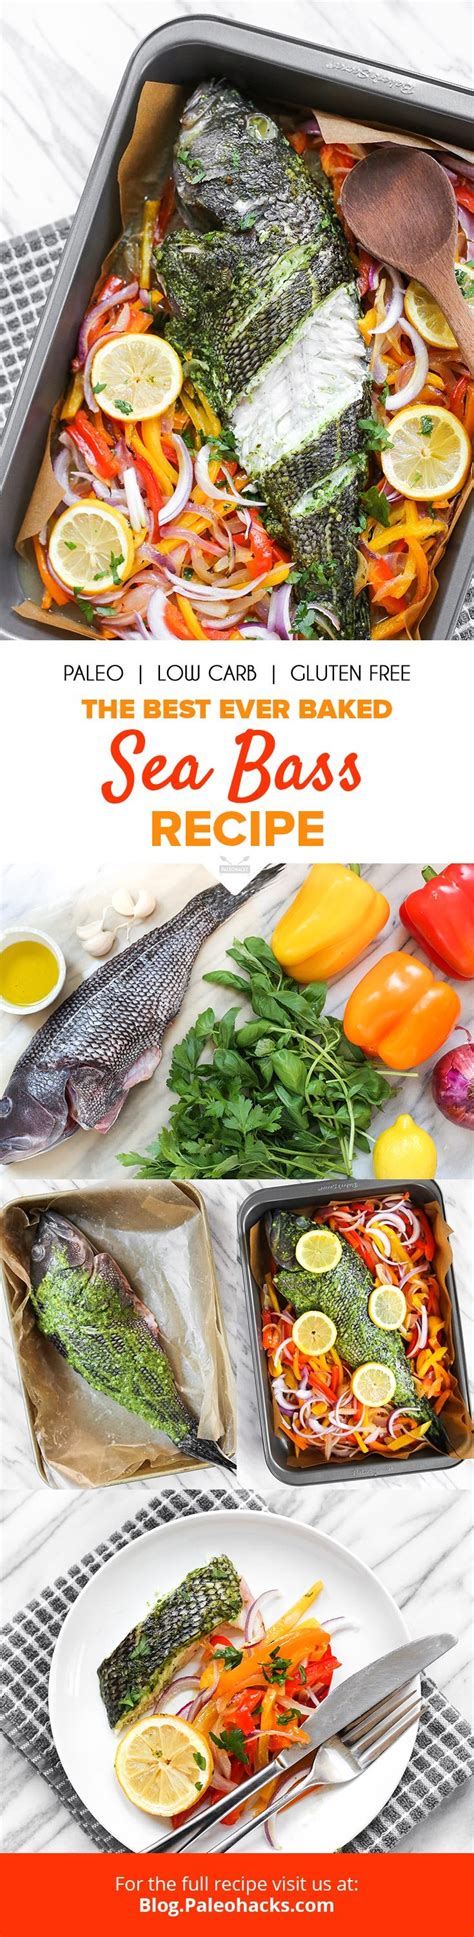 The Best Ever Baked Sea Bass Recipe Paleo Low Carb